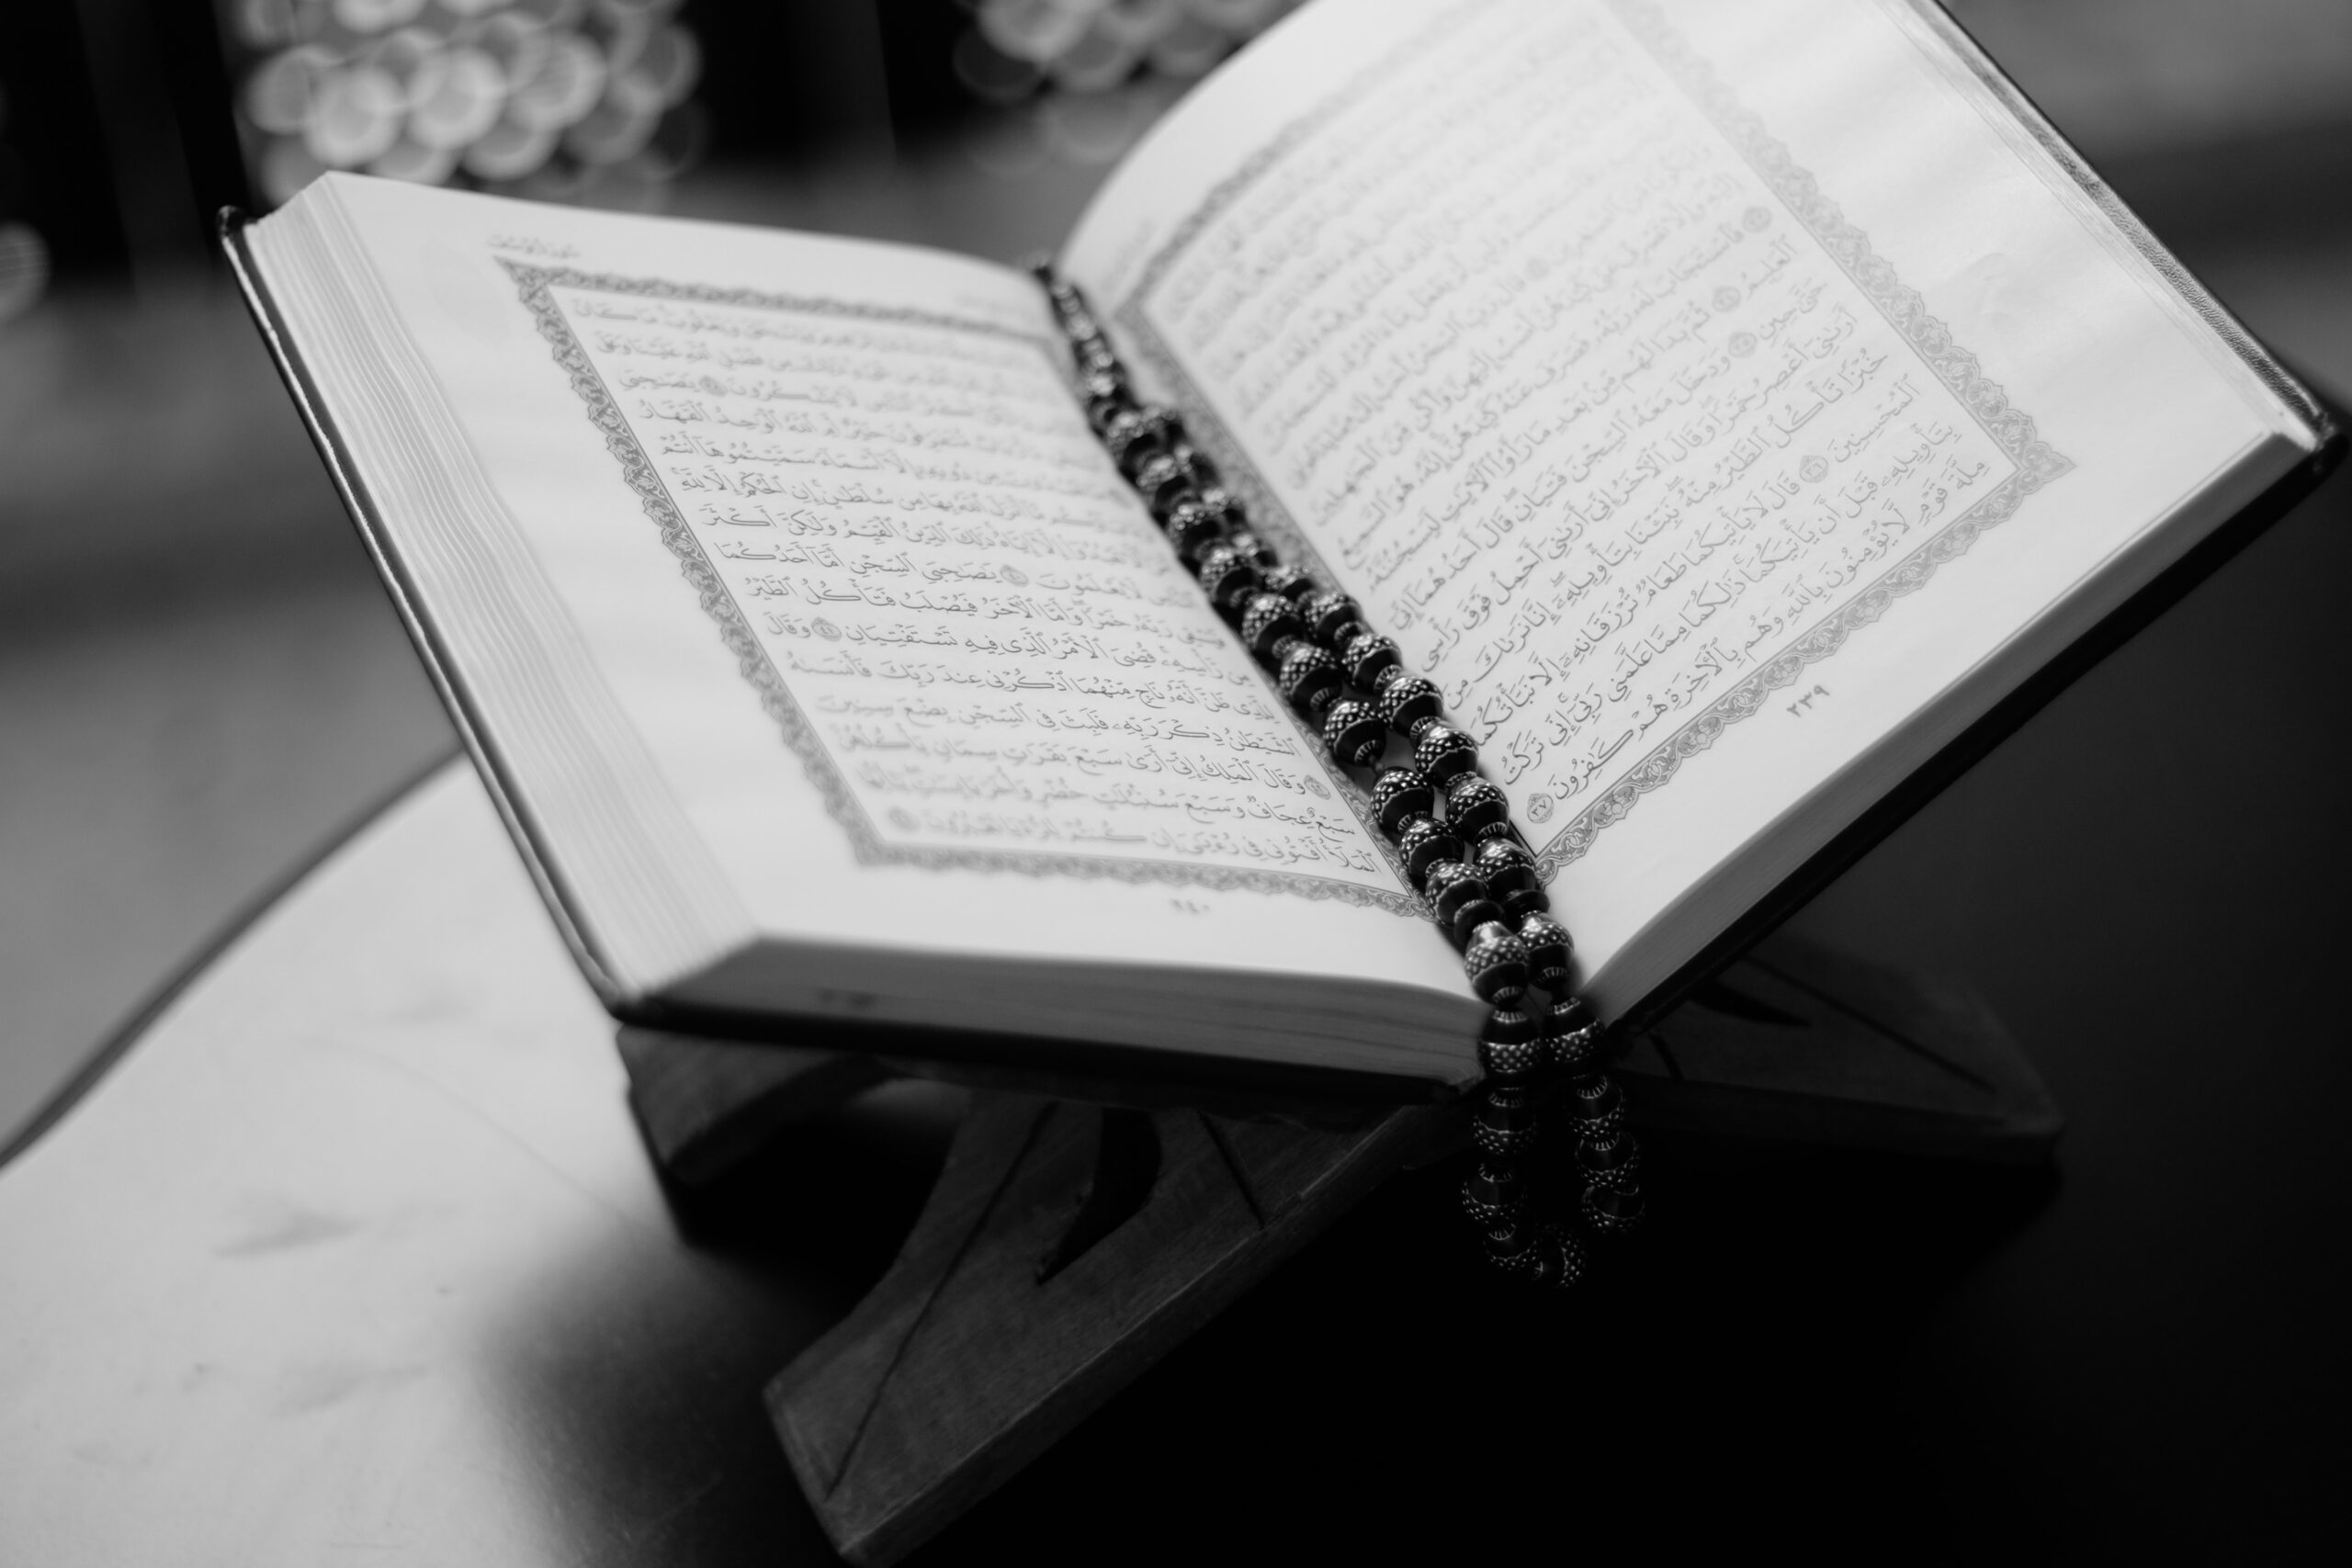 How To Learn to Read the Quran: A Comprehensive Guide